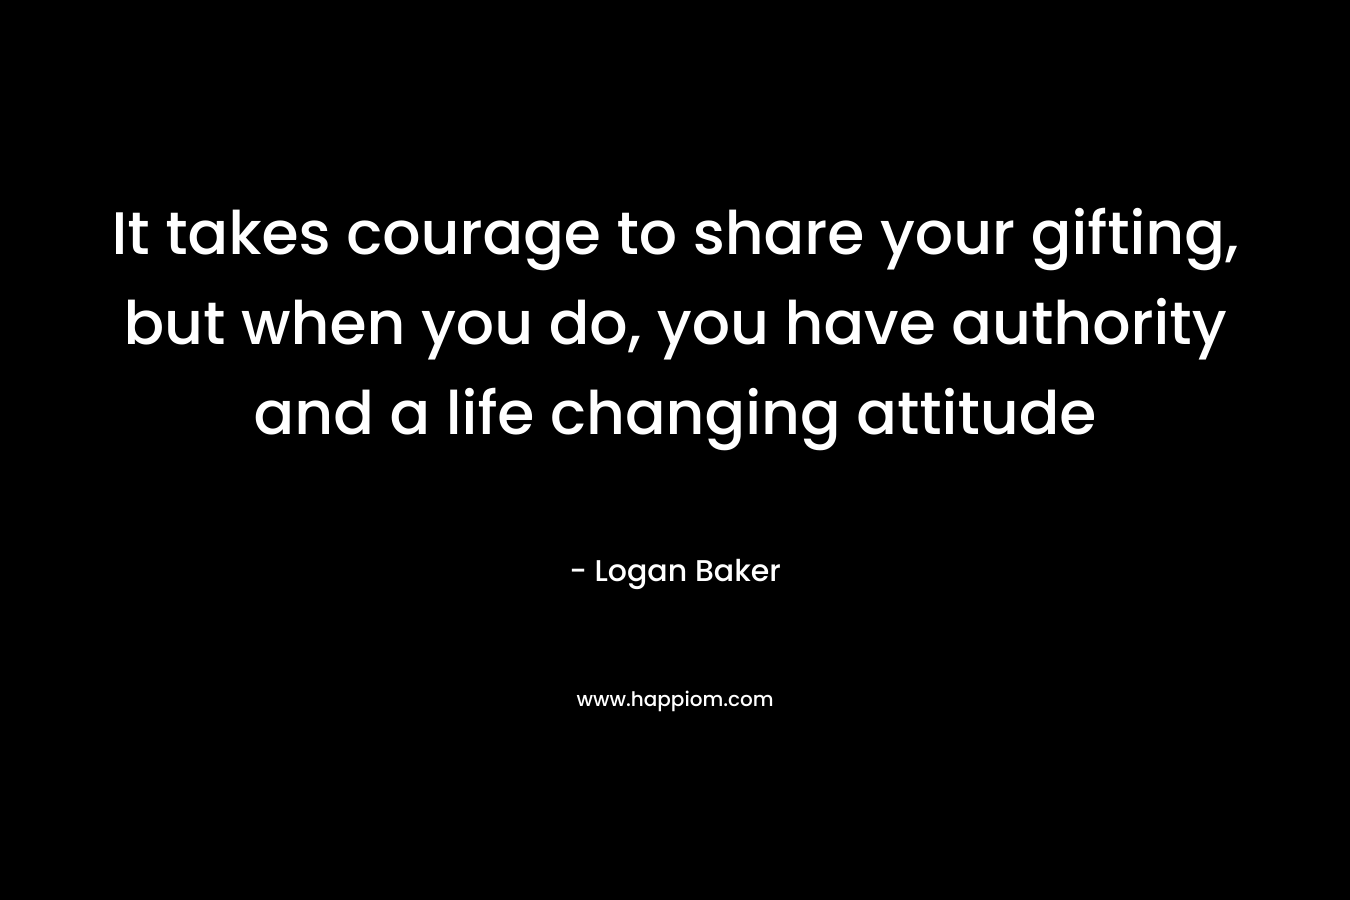 It takes courage to share your gifting, but when you do, you have authority and a life changing attitude